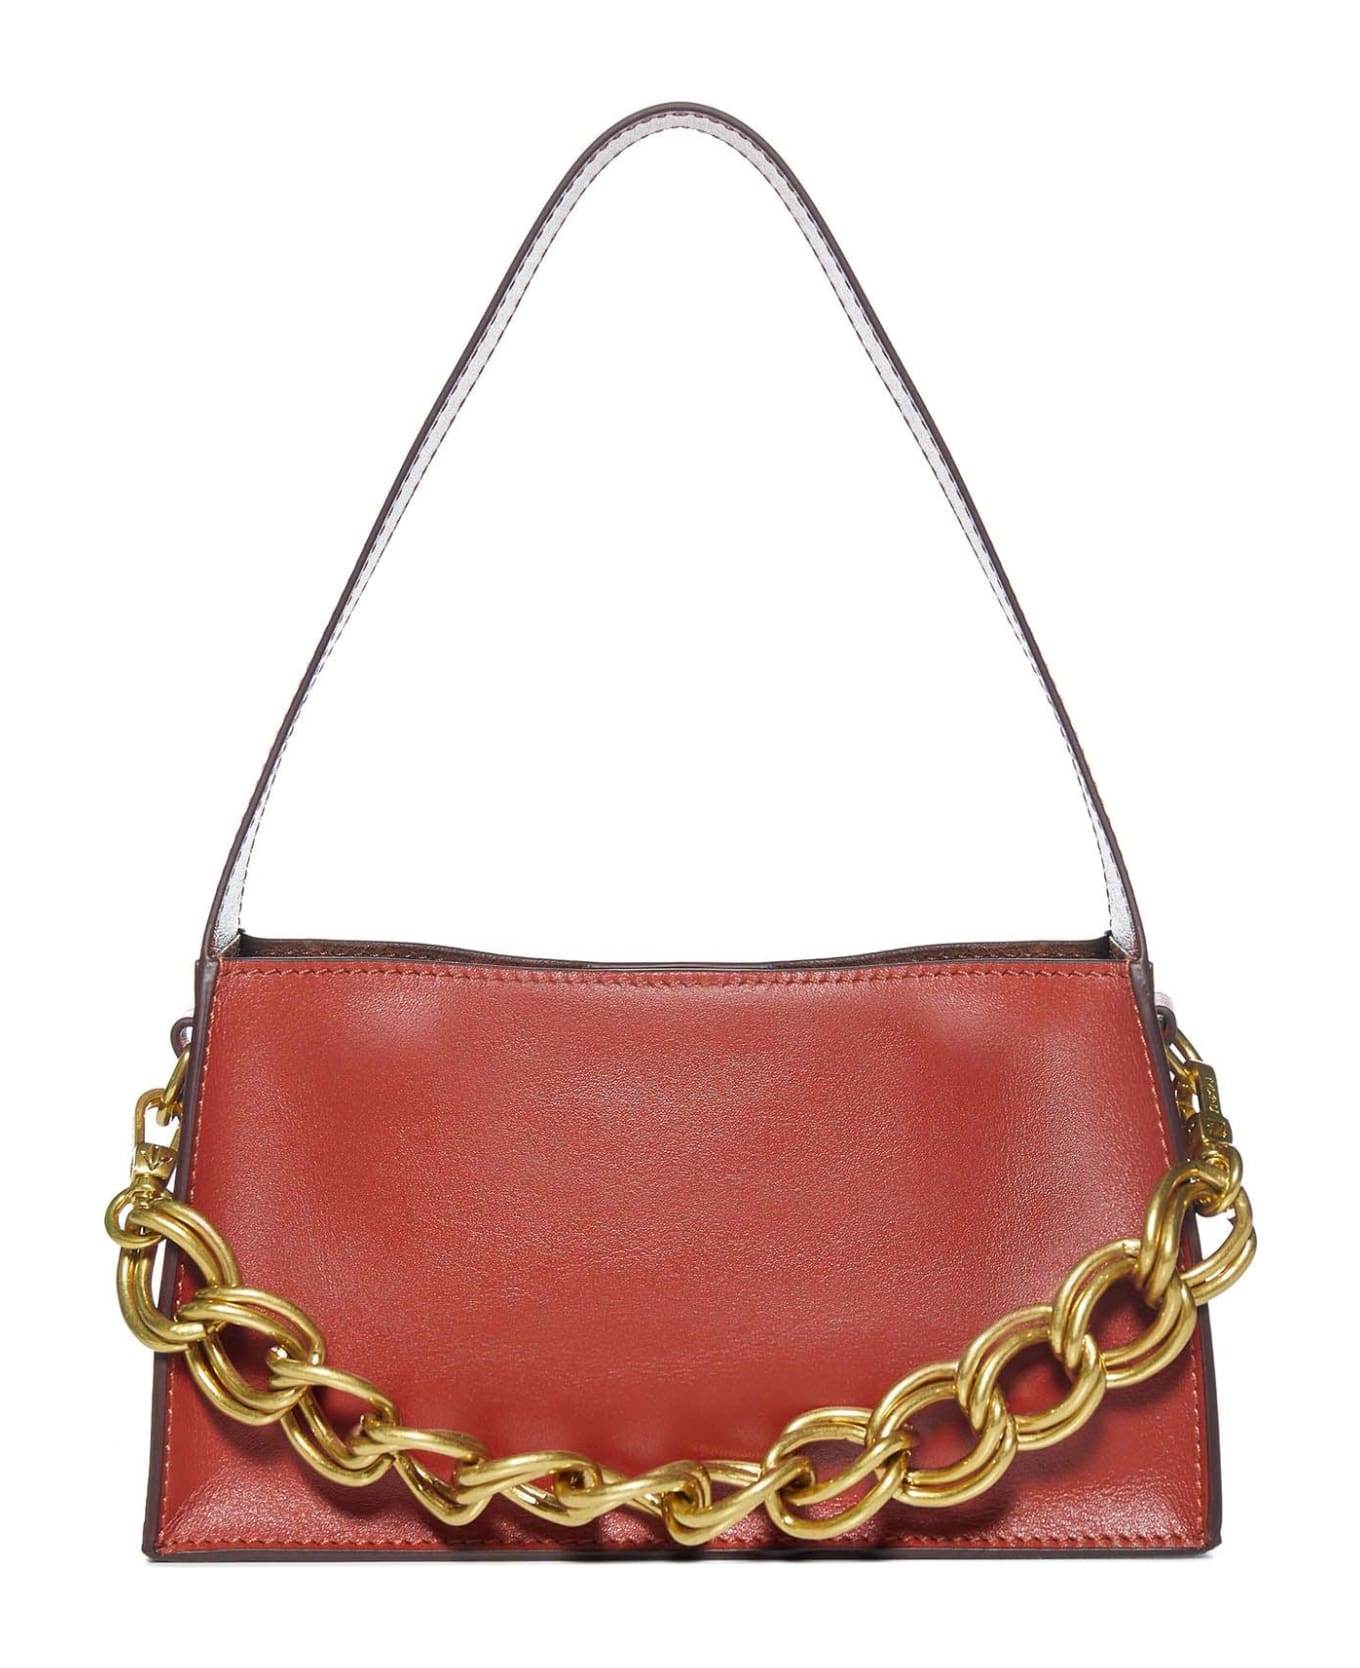 MANU Atelier Chained Shoulder Bag - Cuoio